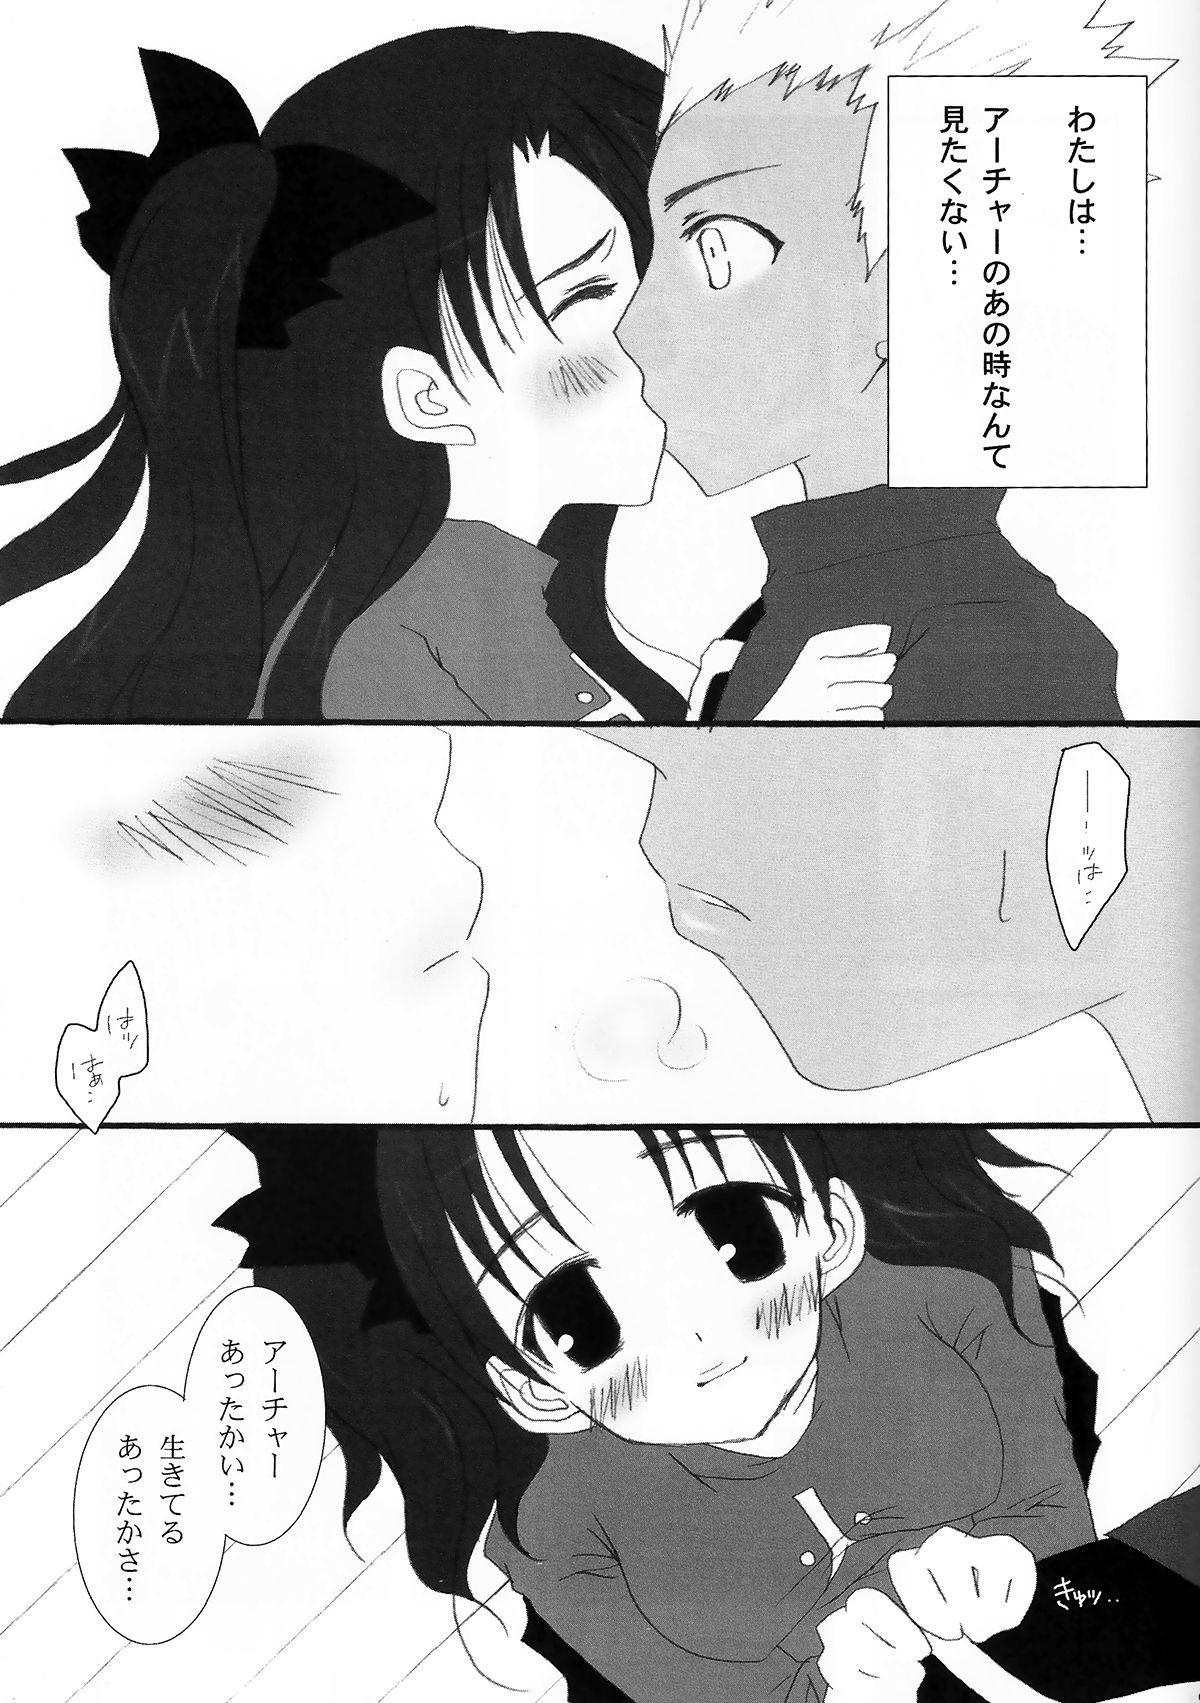 Wam RELATION - Fate stay night Transgender - Page 7